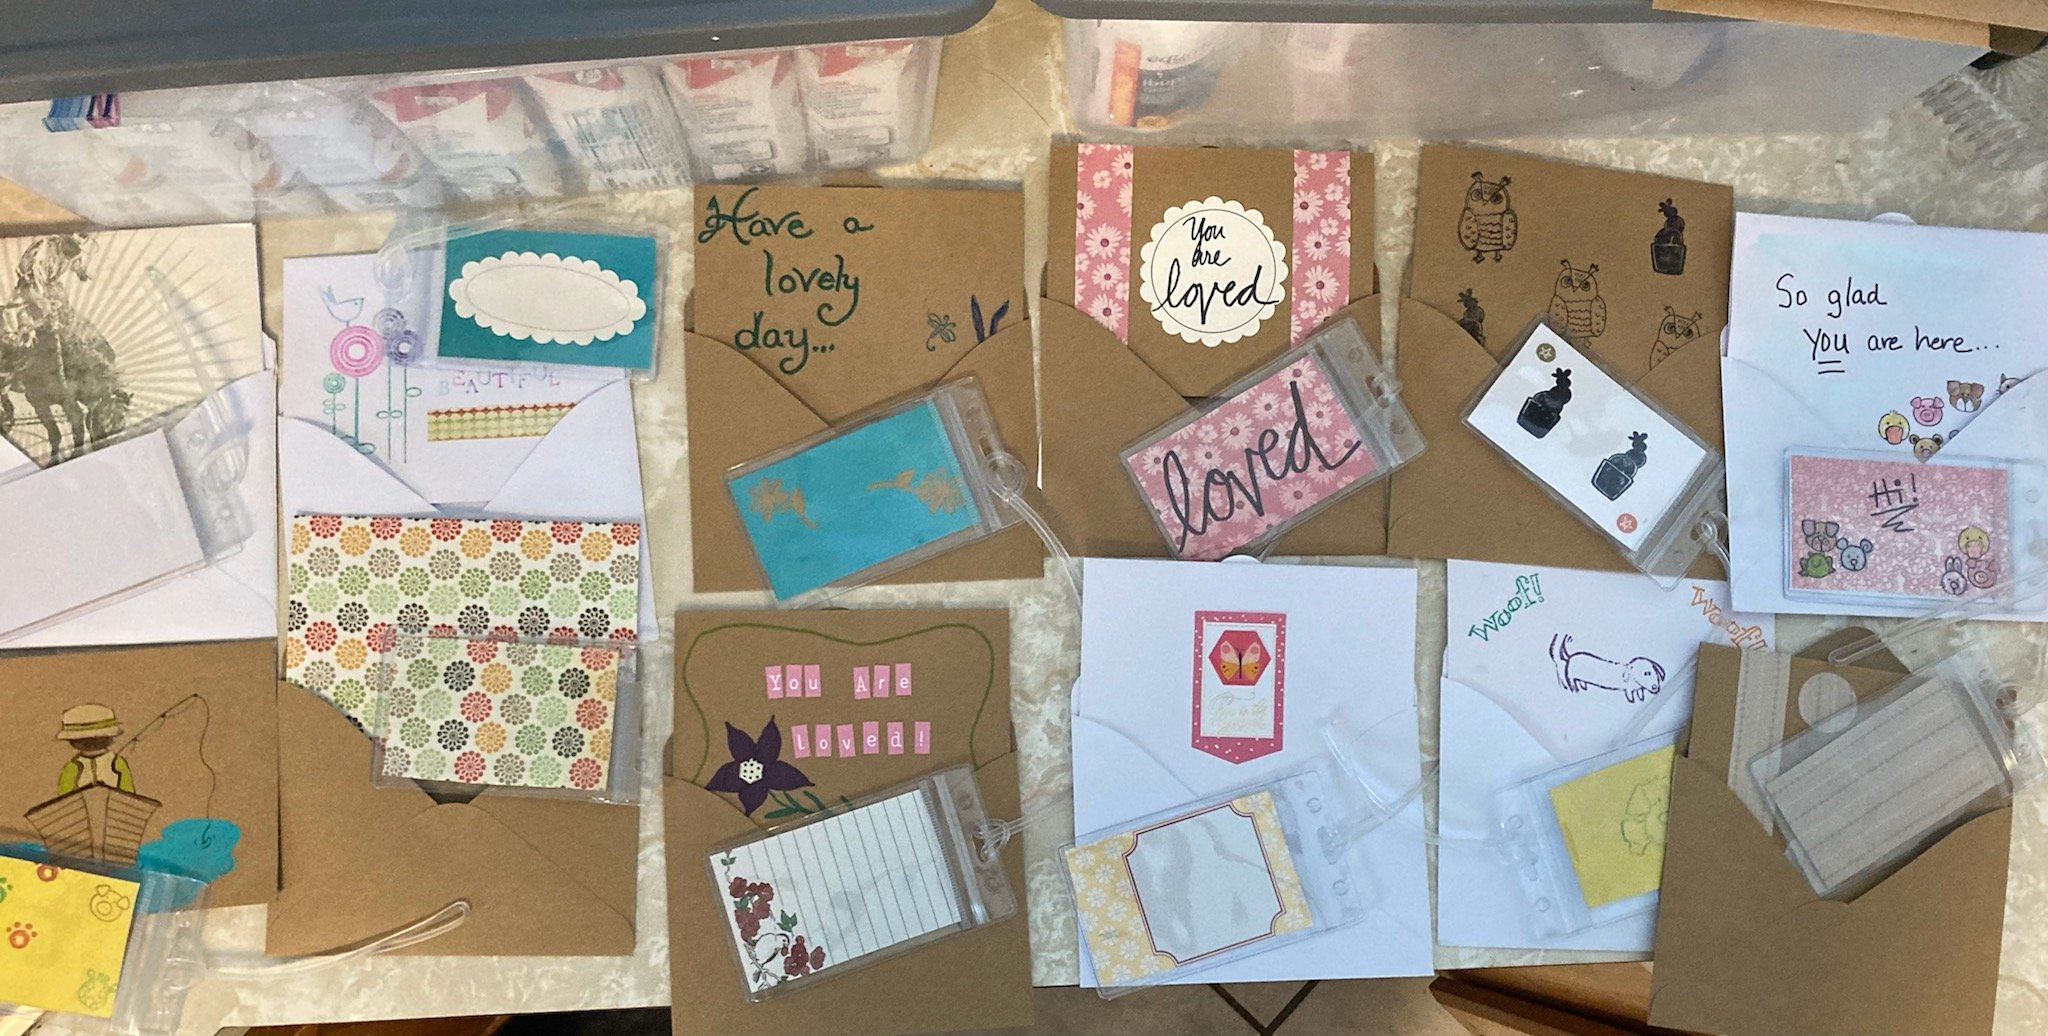 The Creative Women's Circle at Aspen Grove Christian Church of Franklin made a huge batch of beautiful and inspiring tags and corresponding Love Notes for their November project.